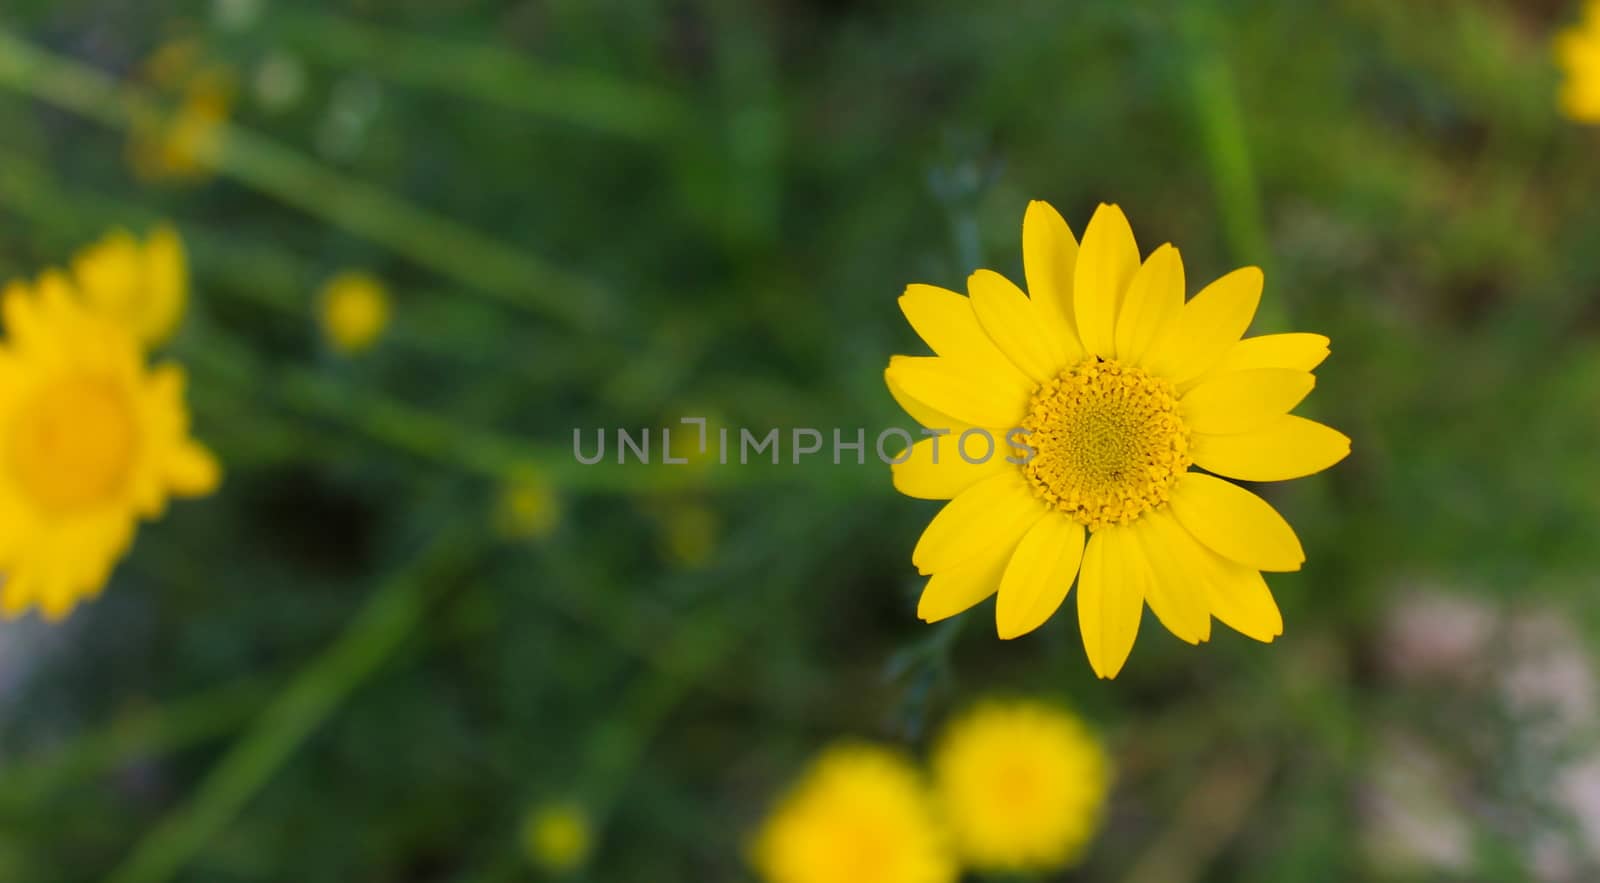 One yellow daisy in focus on the meadow and the others blurred. Beja, Portugal.